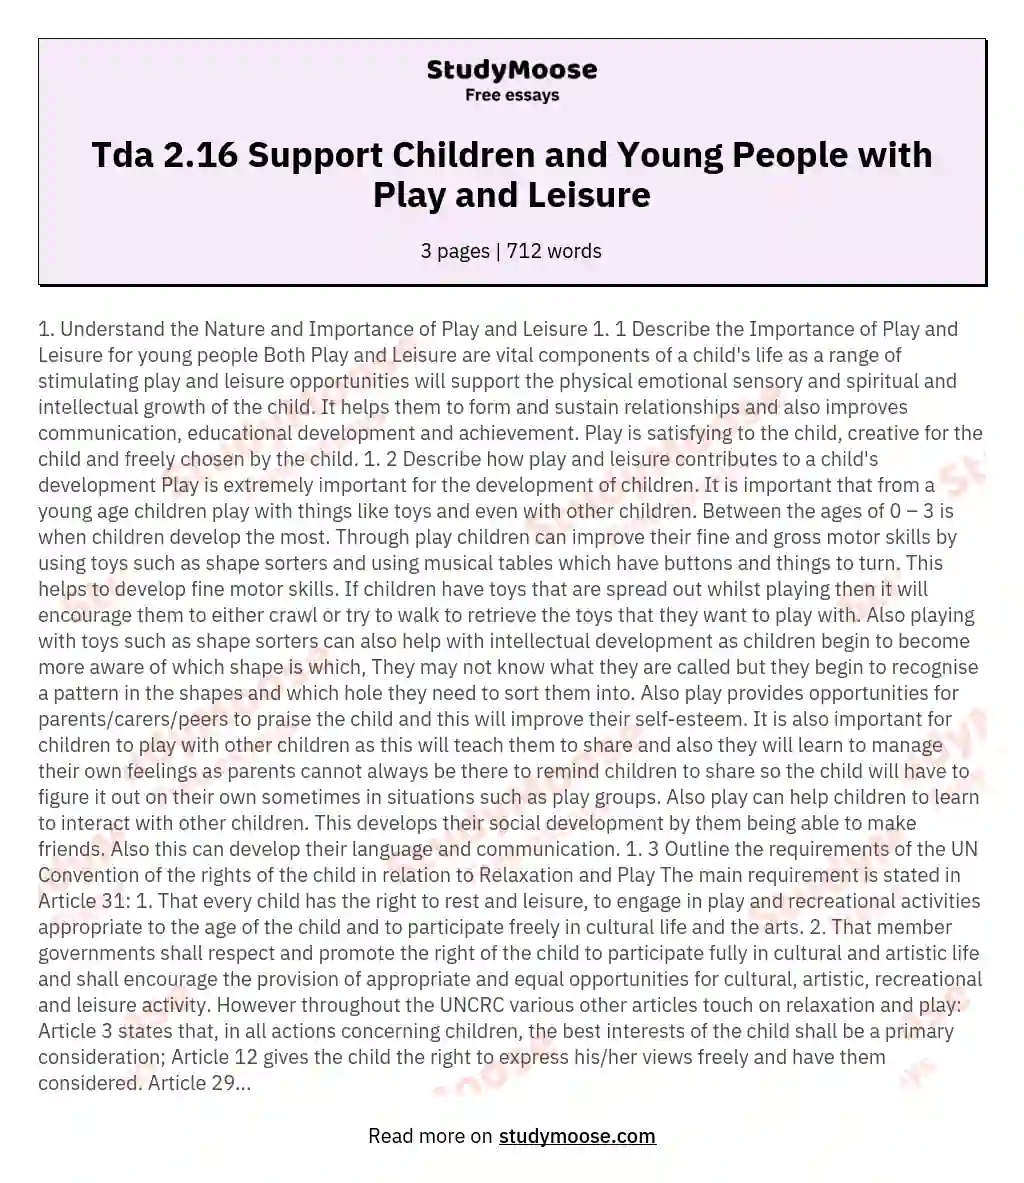 Tda 2.16 Support Children and Young People with Play and Leisure essay